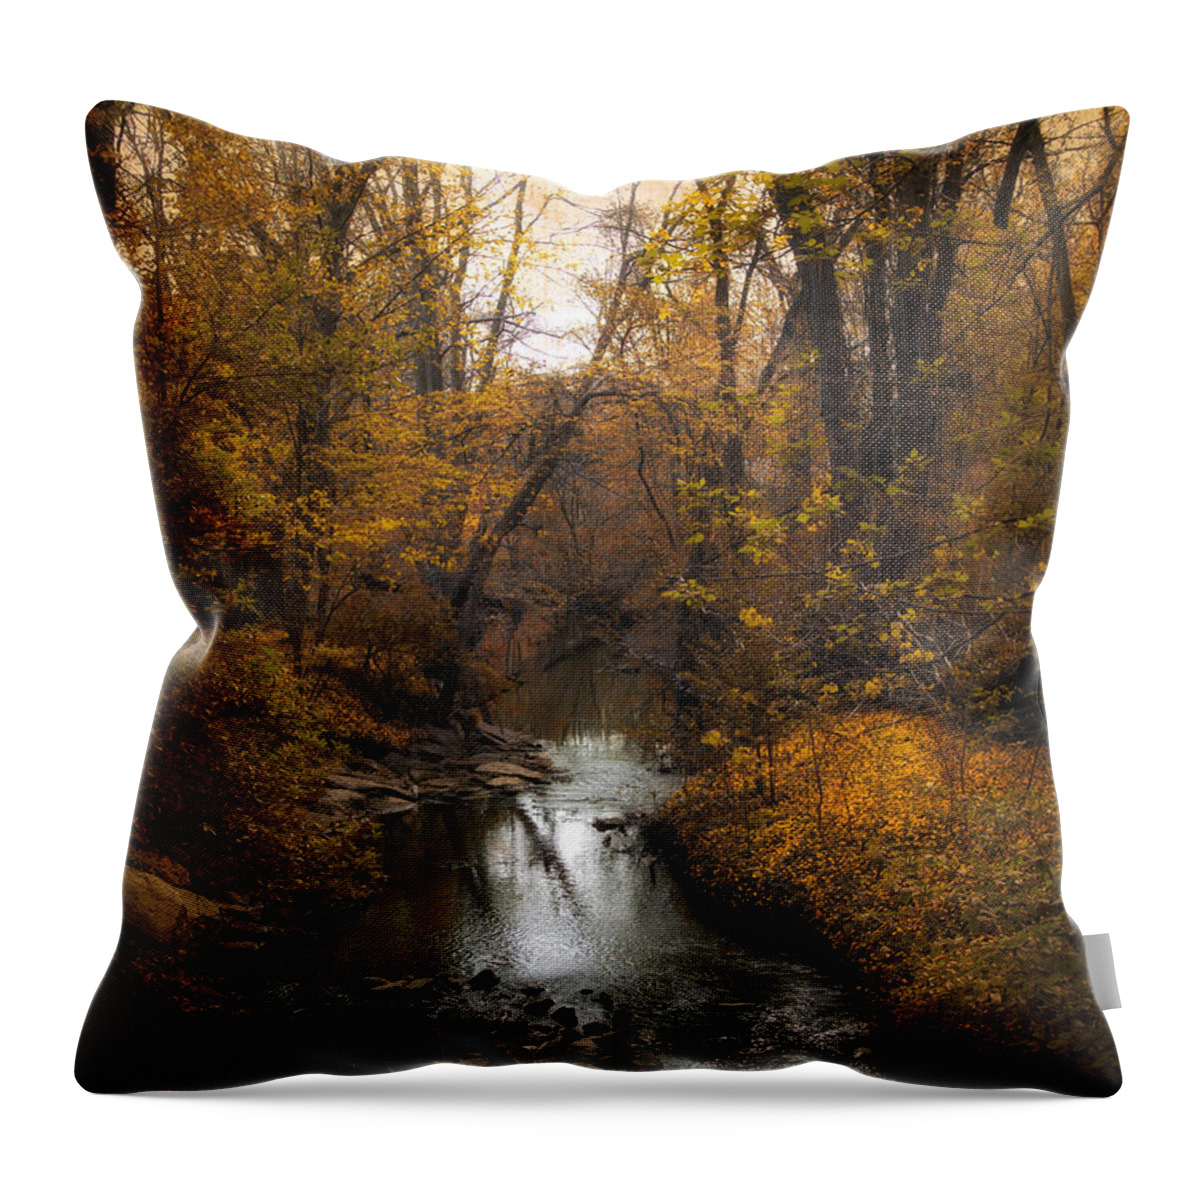 Seasons Throw Pillow featuring the photograph River Views by Jessica Jenney